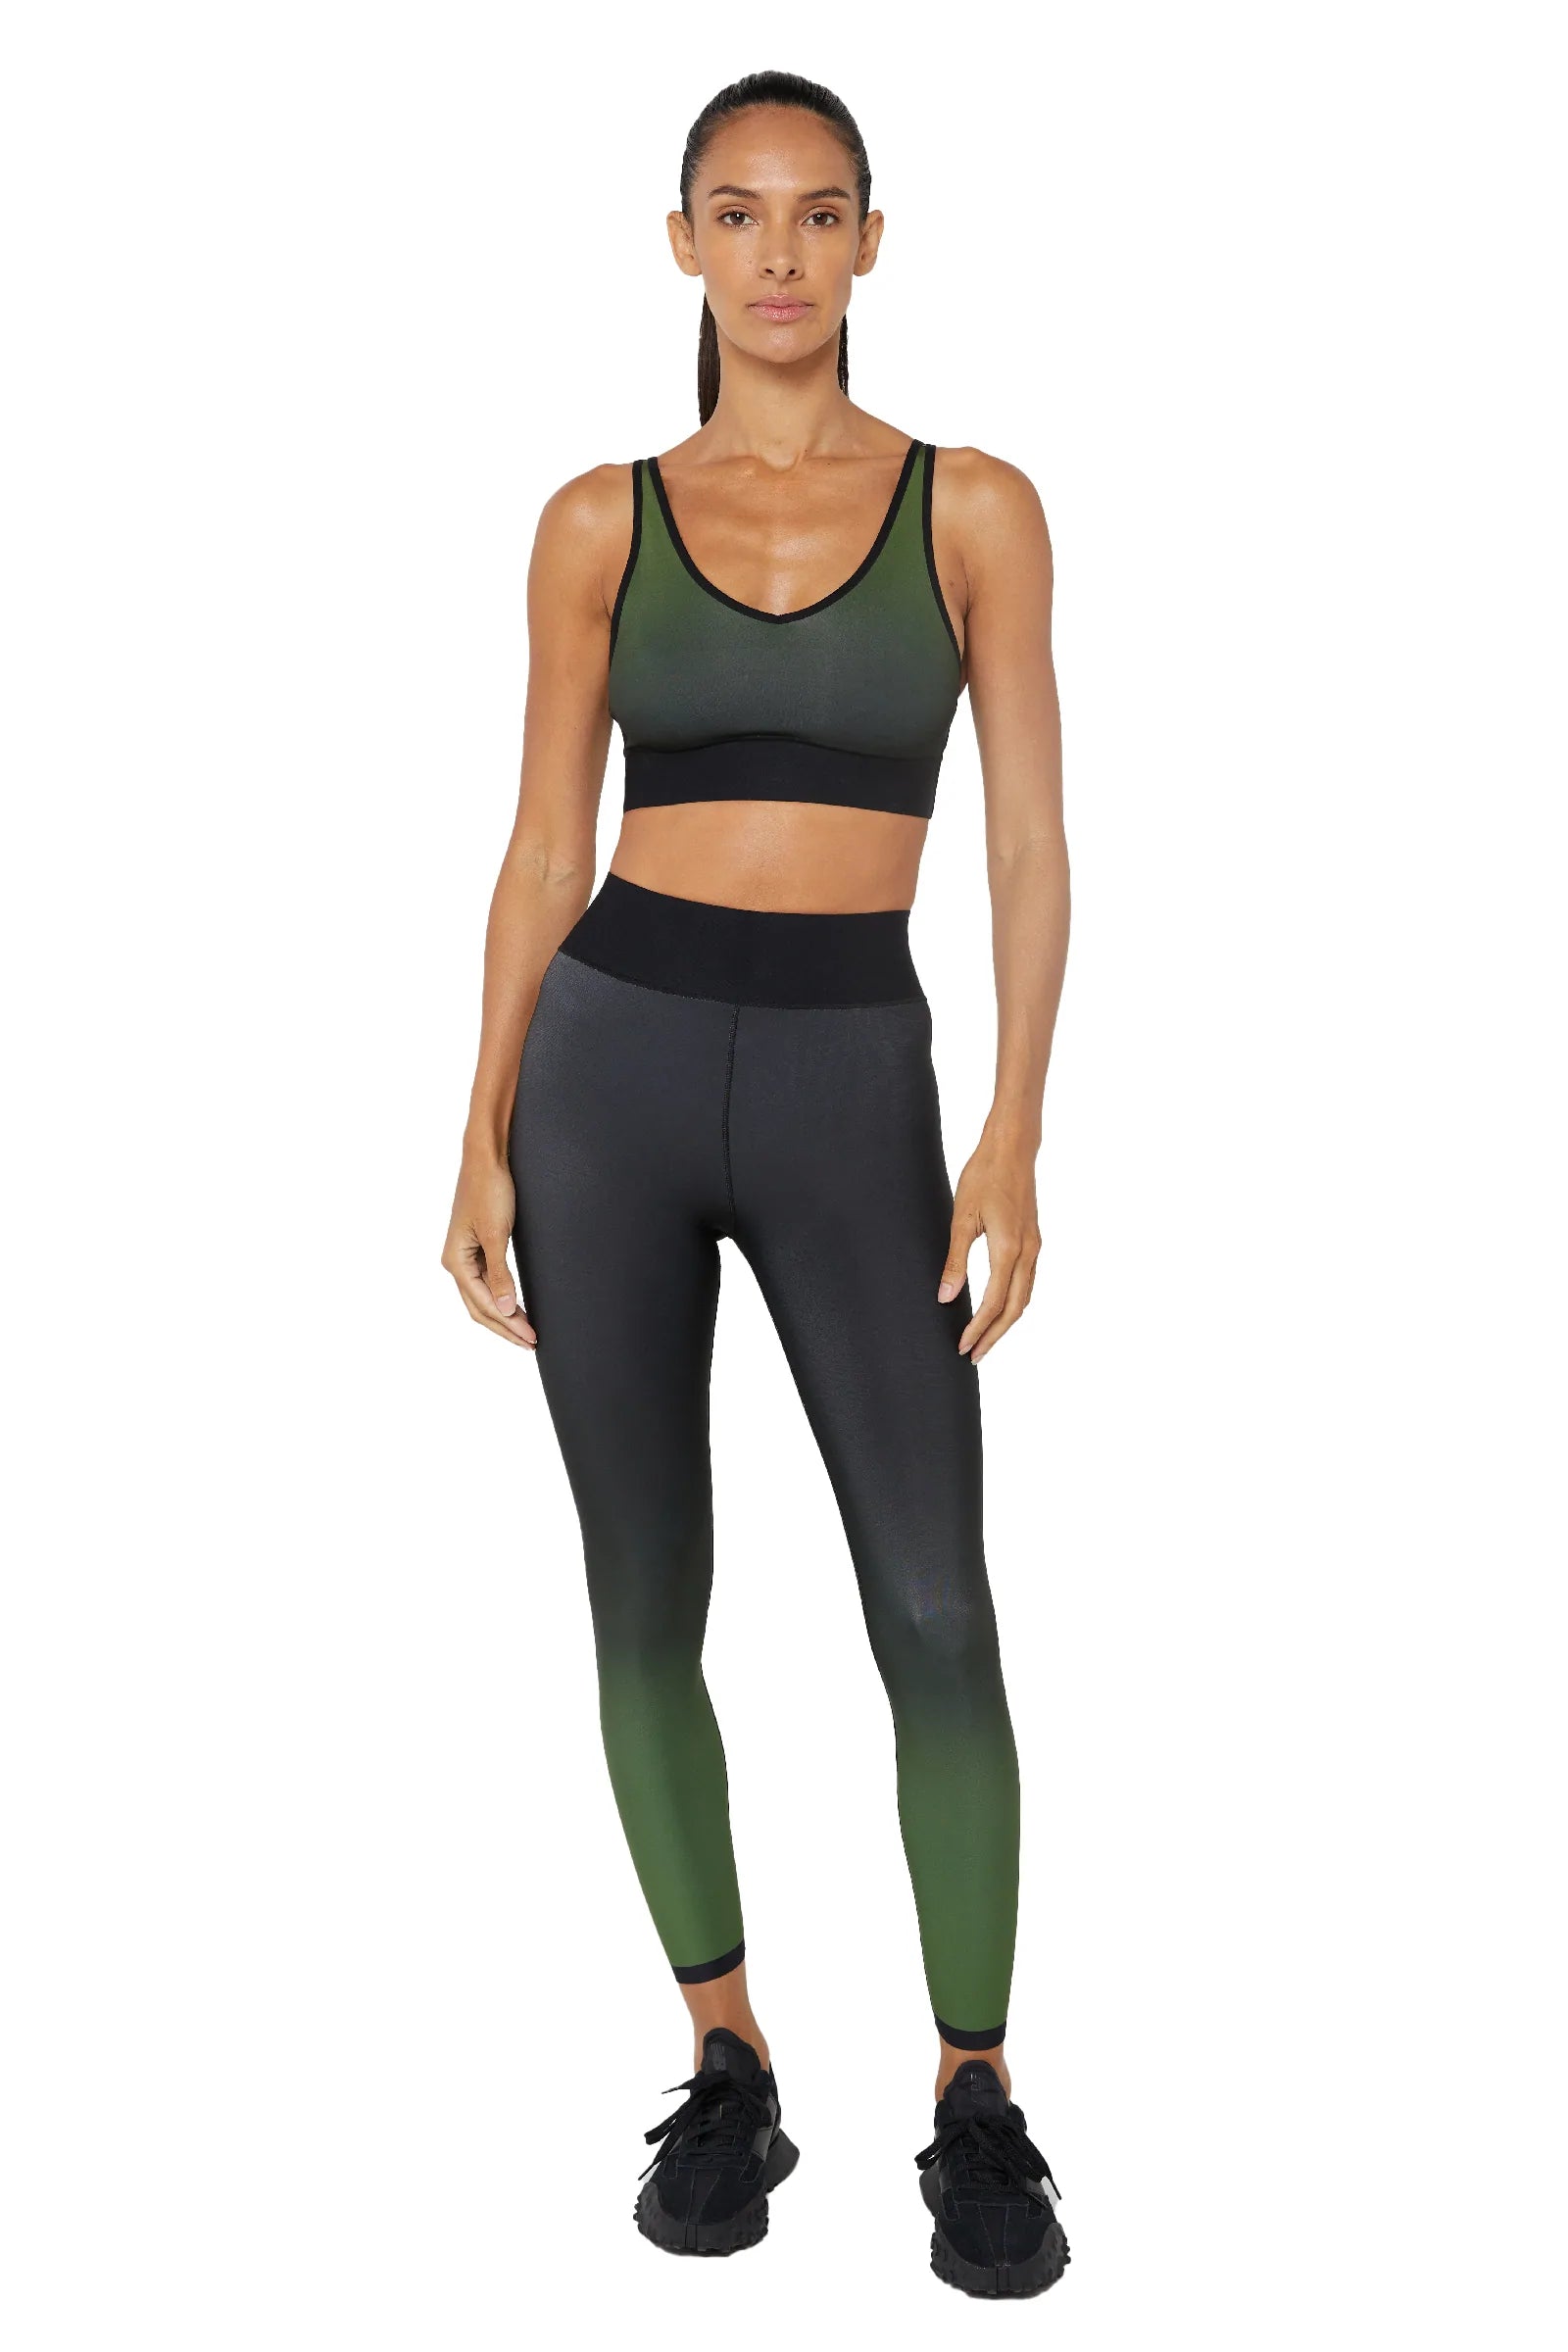 Ultracor Cycling Athletic Leggings for Women